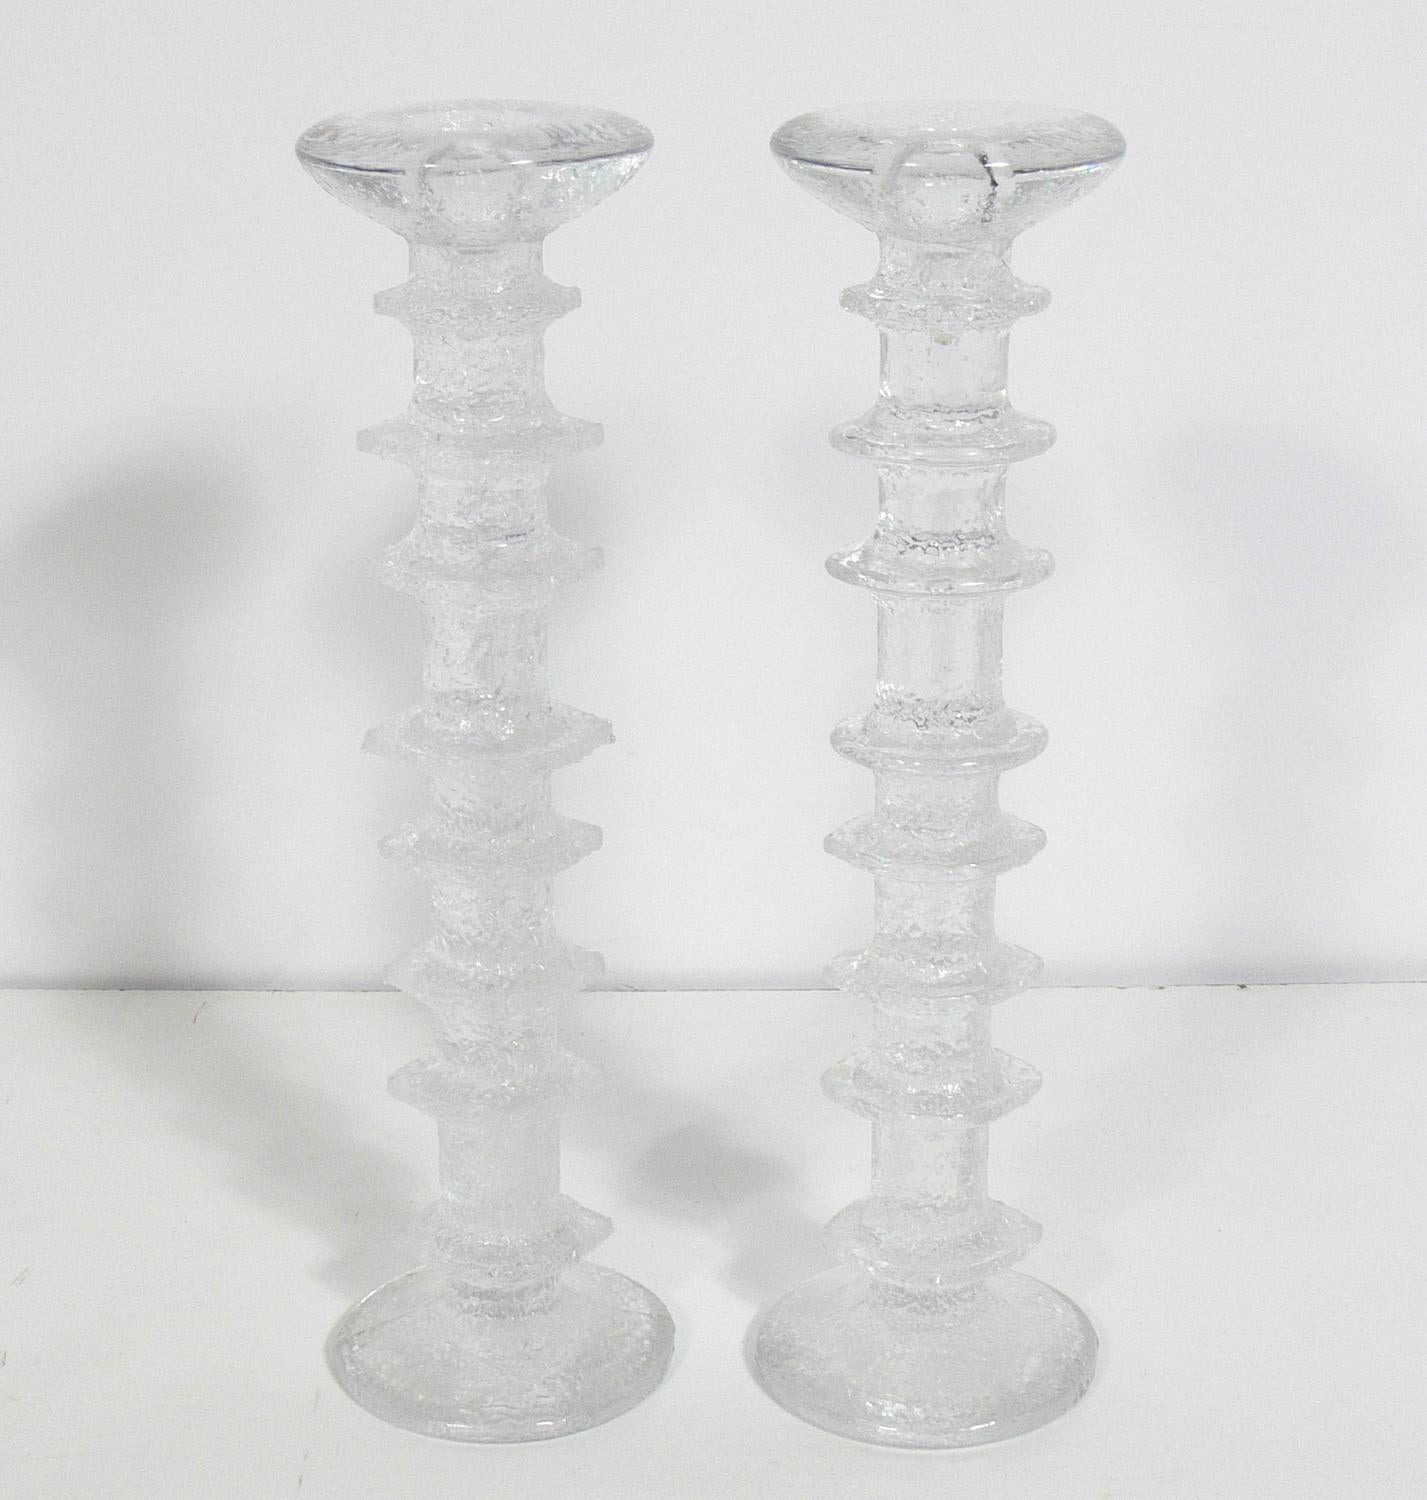 Collection of sculptural Festivo candlesticks by Timo Sarpaneva for Iittala, Finland, circa 1960s. This collection consists of eighteen candlesticks. The largest measures 9.5